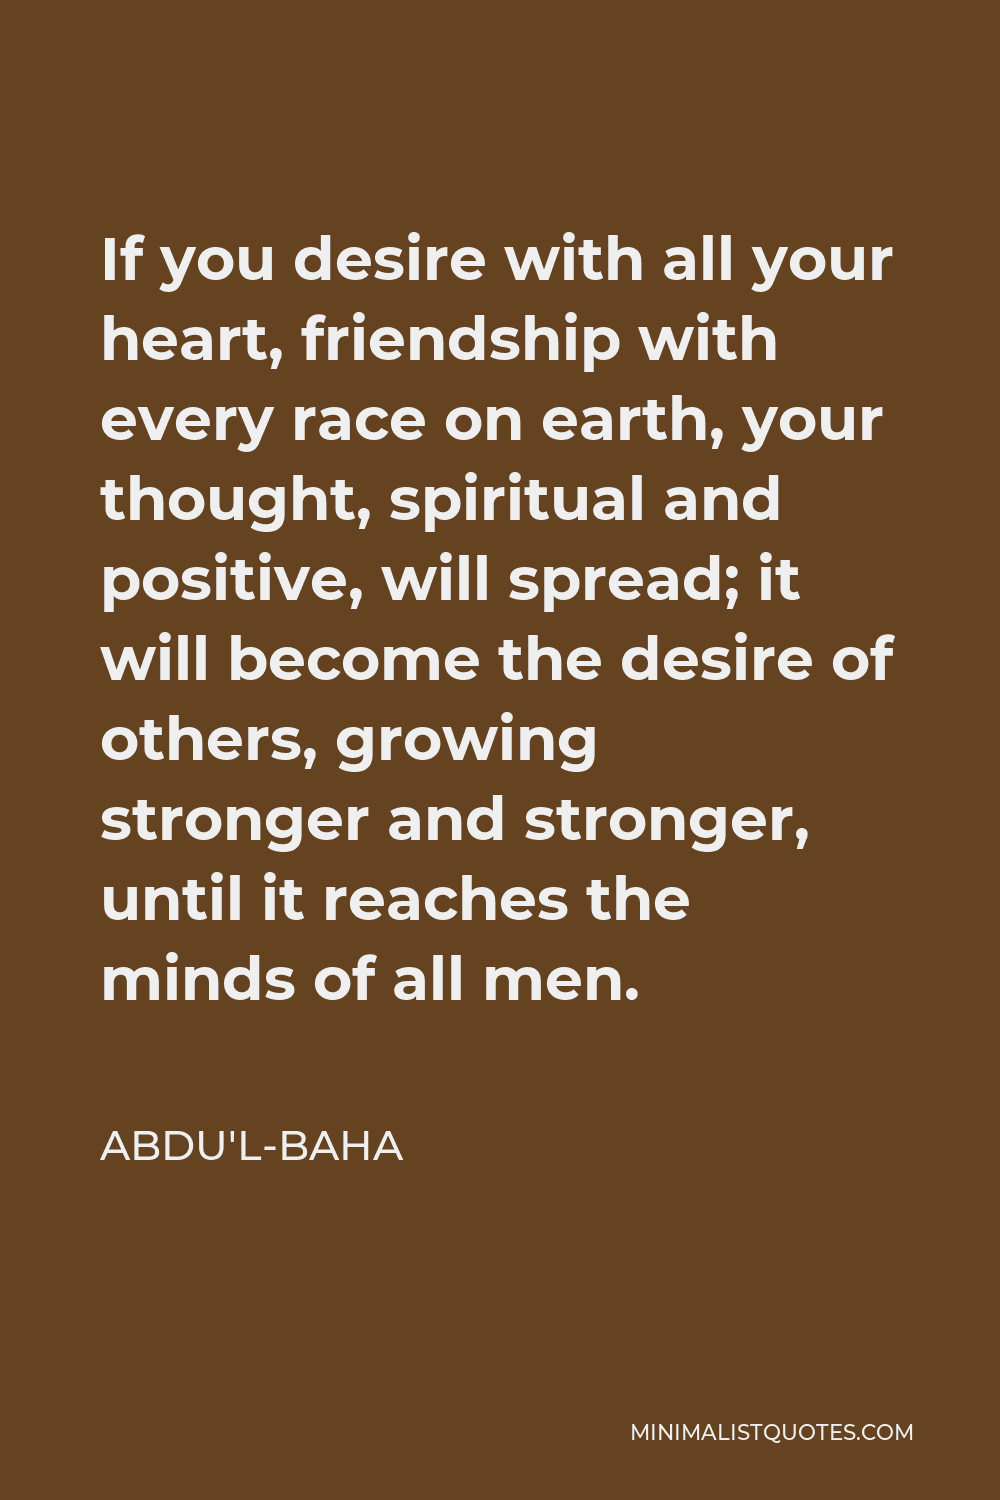 Abdu'l-Baha Quote - If you desire with all your heart, friendship with every race on earth, your thought, spiritual and positive, will spread; it will become the desire of others, growing stronger and stronger, until it reaches the minds of all men.